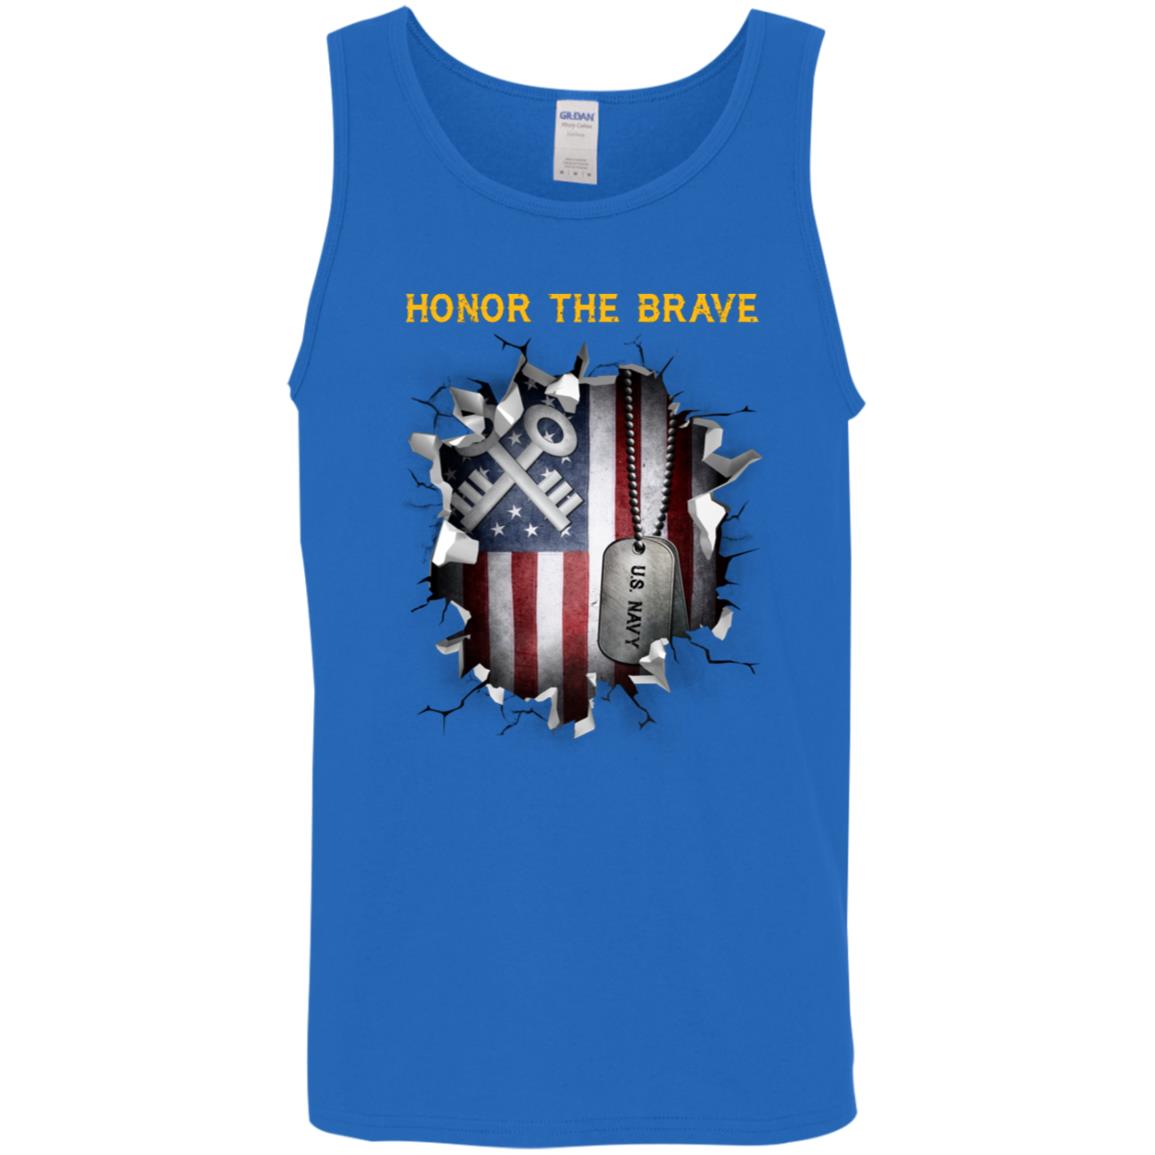 U.S Navy Logistics specialist Navy LS - Honor The Brave Front Shirt